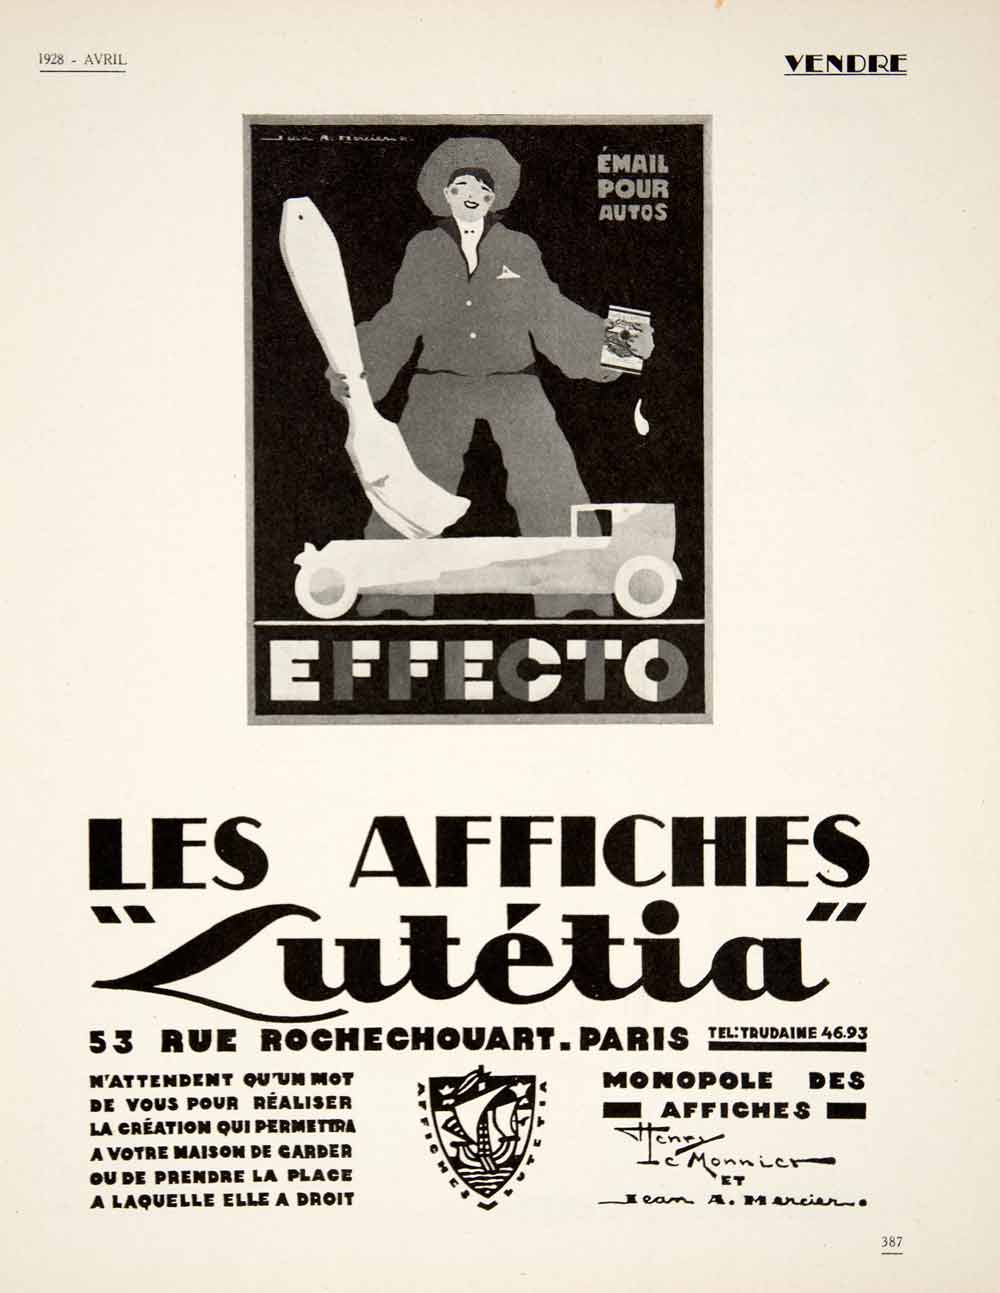 1928 Ad Les Affiches Lutetia French Advertising Agency 53 Rue Rochechouart VEN5